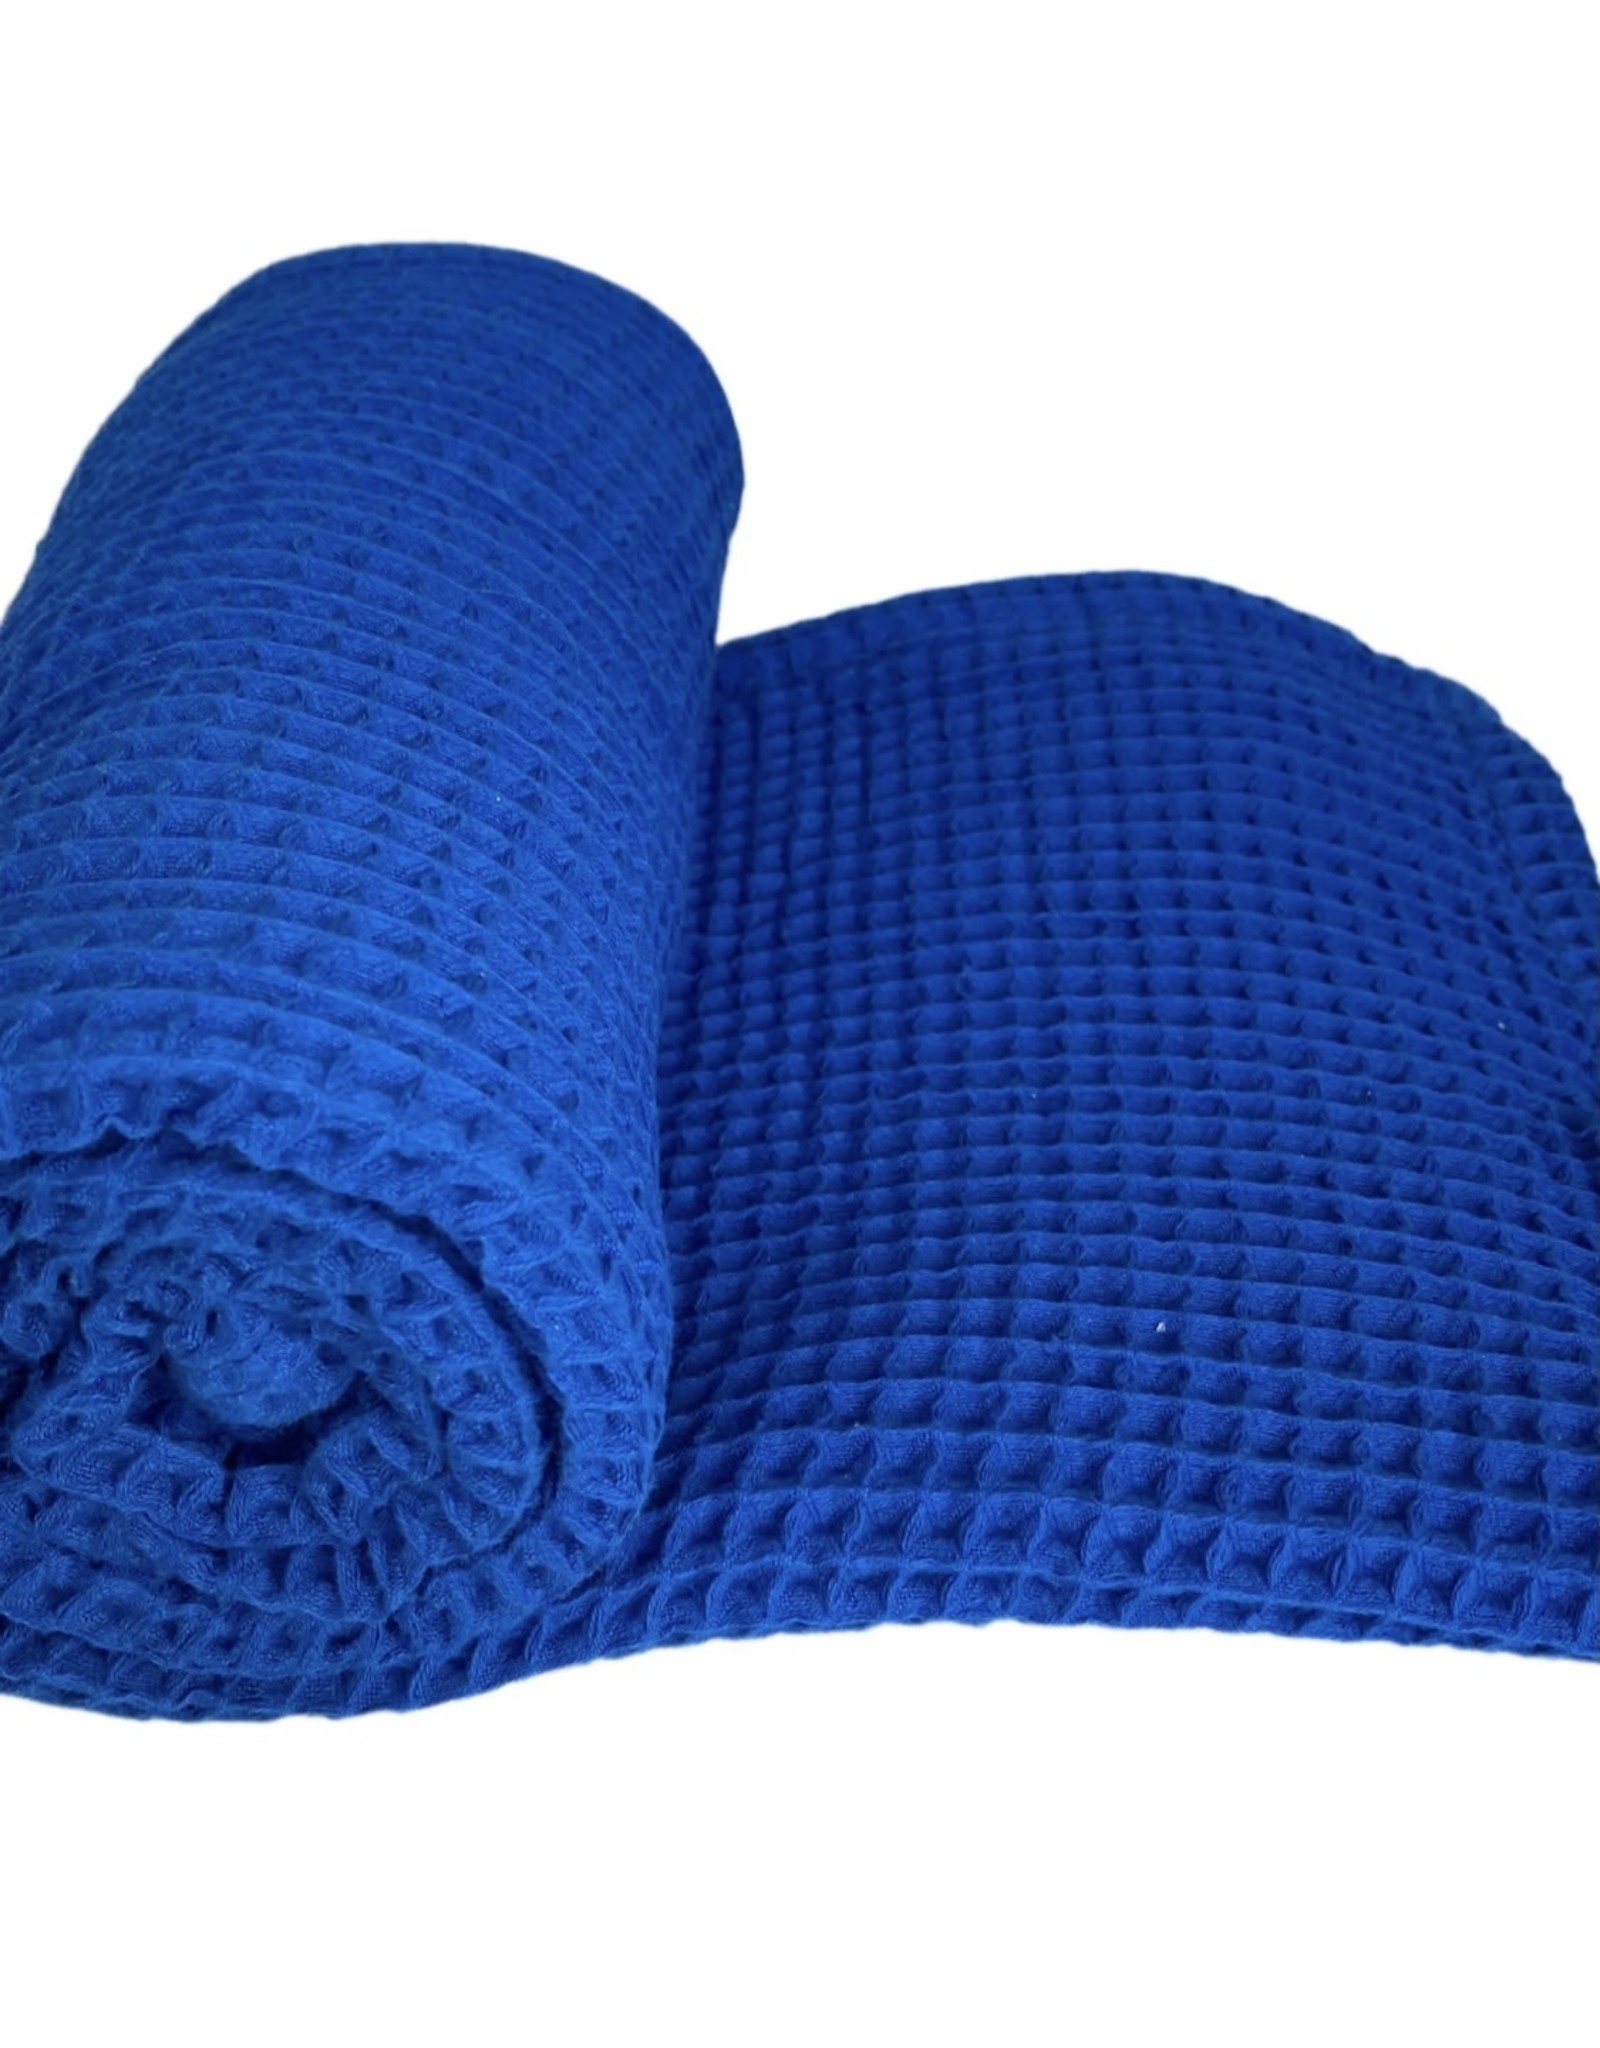 Stroller Society Stroller Society- 40" by 40" Waffle Blanket: Classic Blue